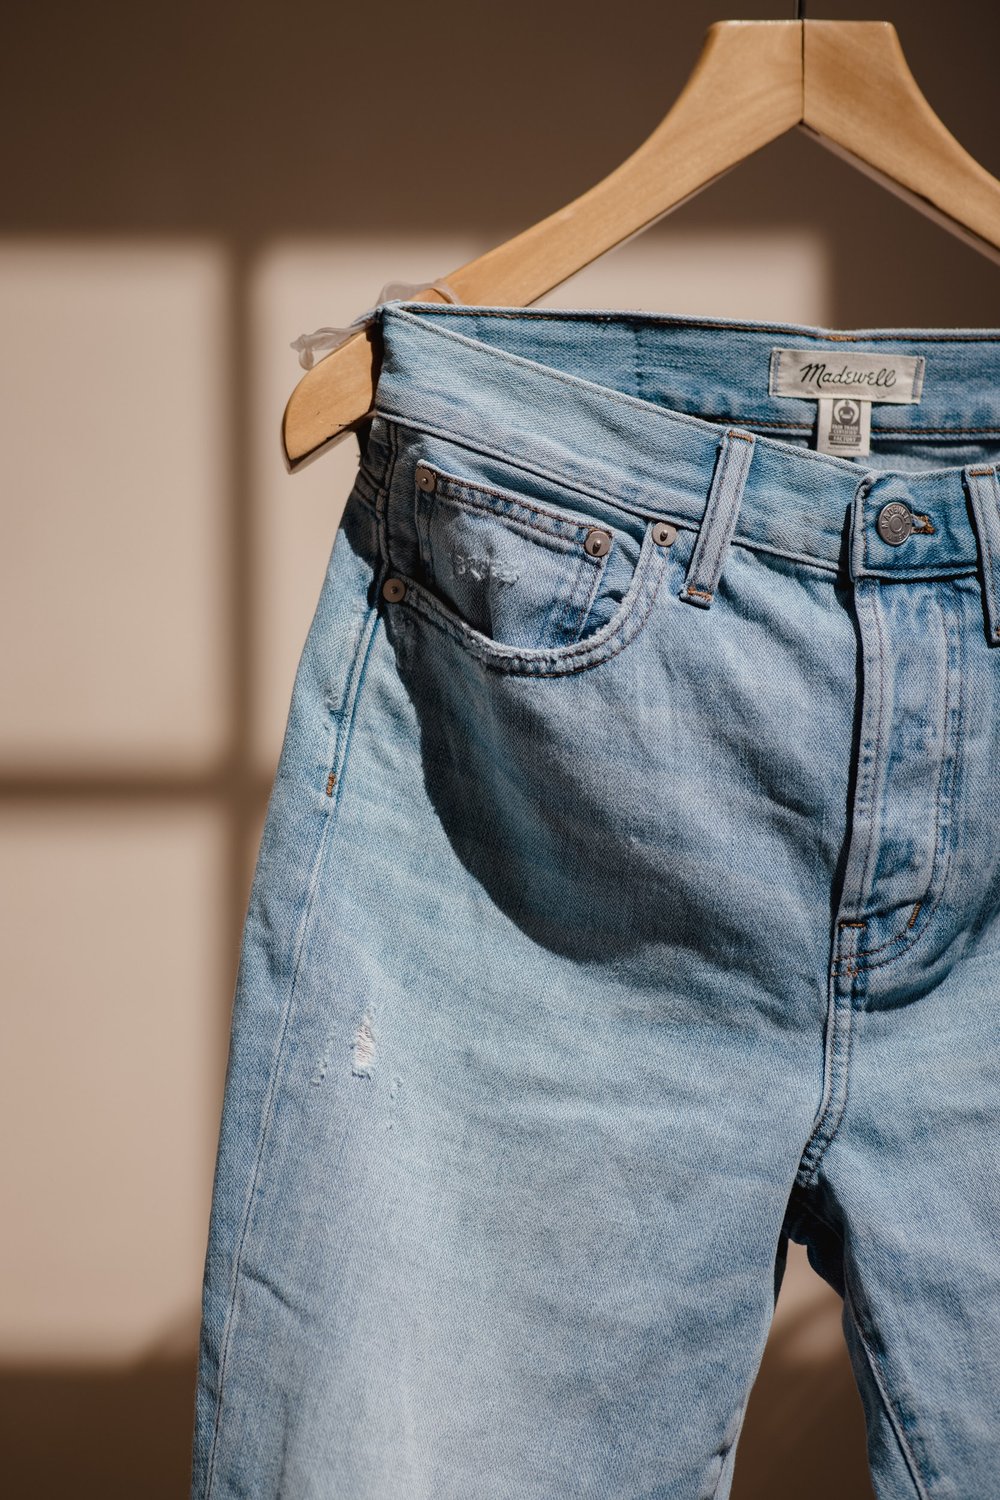 6 Affordable Sustainable & Ethical Denim Jeans Brands — The Honest Consumer